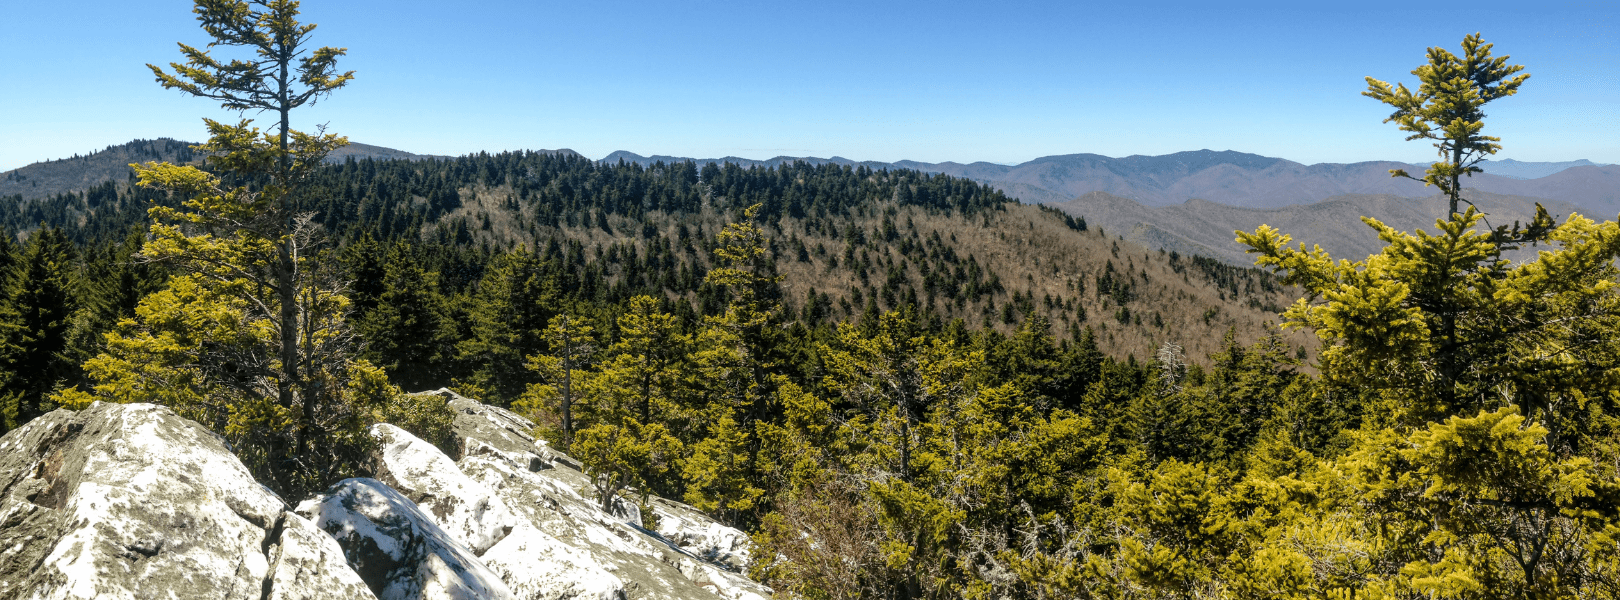 Set an Active Itinerary of Things to do in Brevard NC